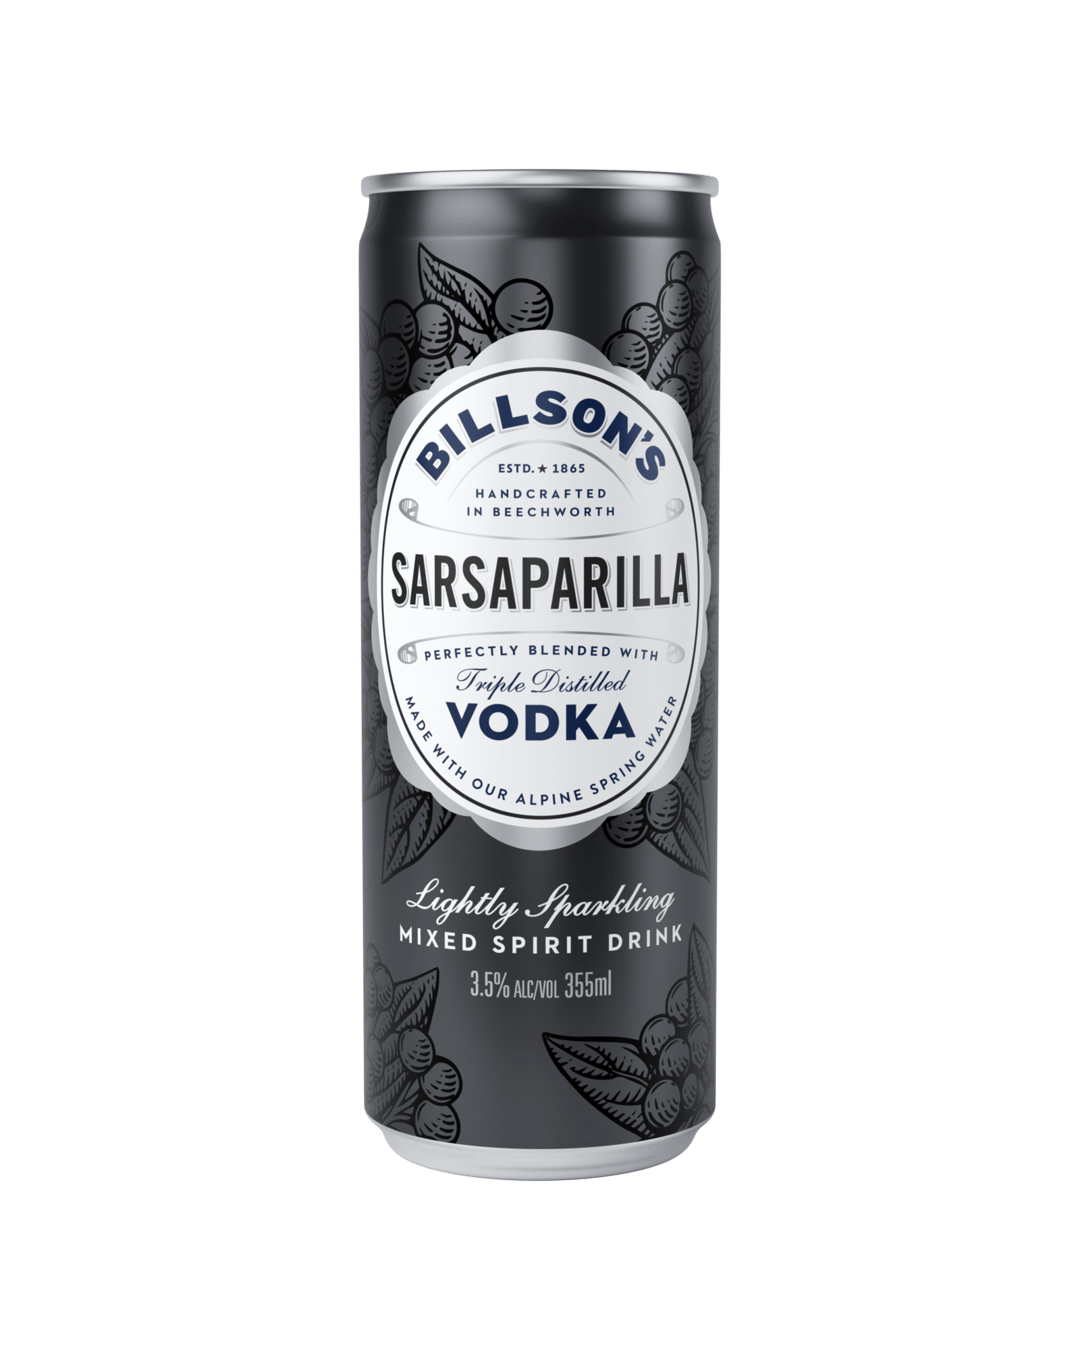 Lime & Coconut Cordial – Billson's Beverages